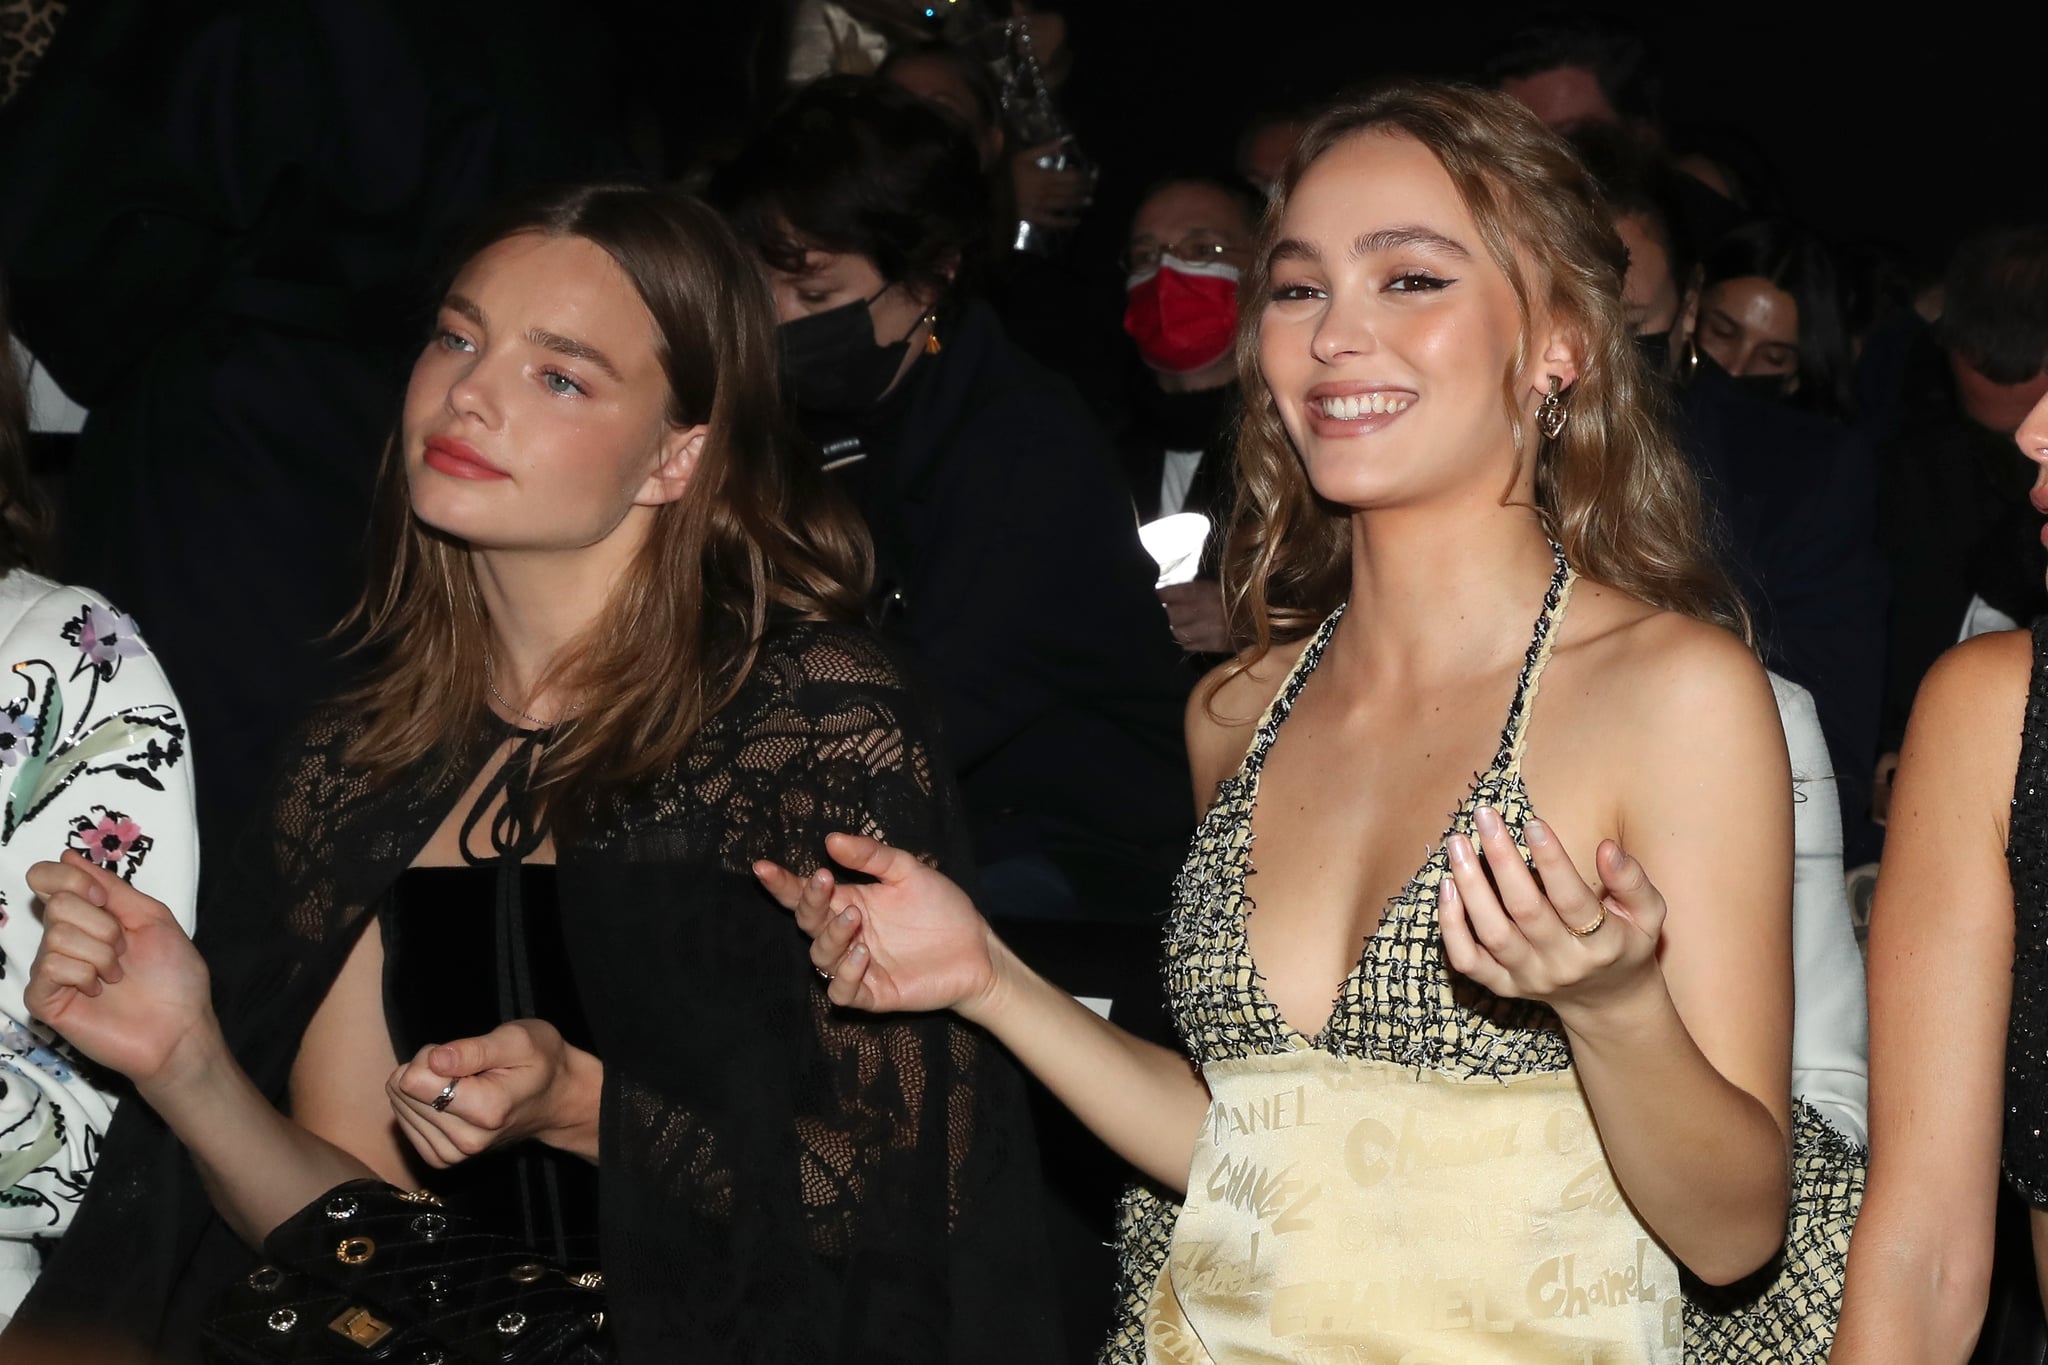 PARIS, FRANCE - OCTOBER 05: (EDITORIAL USE ONLY - For Non-Editorial use please seek approval from Fashion House) Kristine Froseth and Lily-Rose Depp attend the Chanel Womenswear Spring/Summer 2022 show as part of Paris Fashion Week on October 05, 2021 in Paris, France. (Photo by Bertrand Rindoff Petroff/Getty Images)